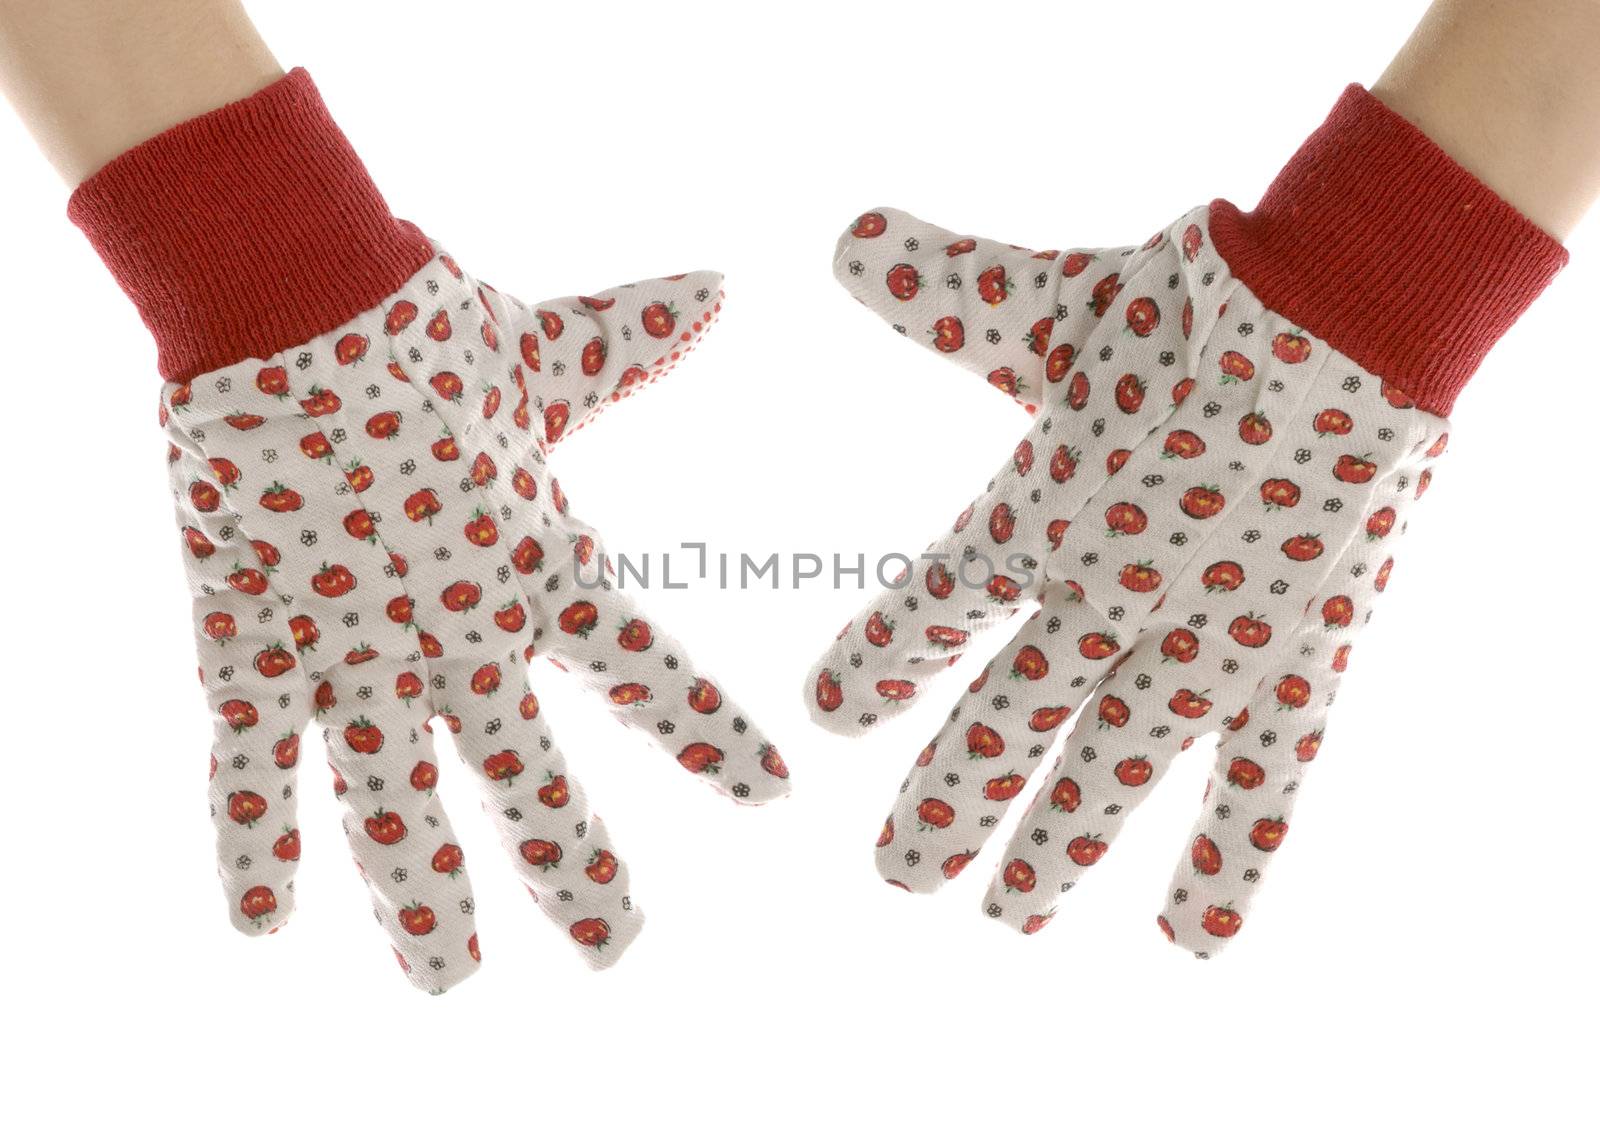 hands wearing womens gardening or work gloves isolated on white background